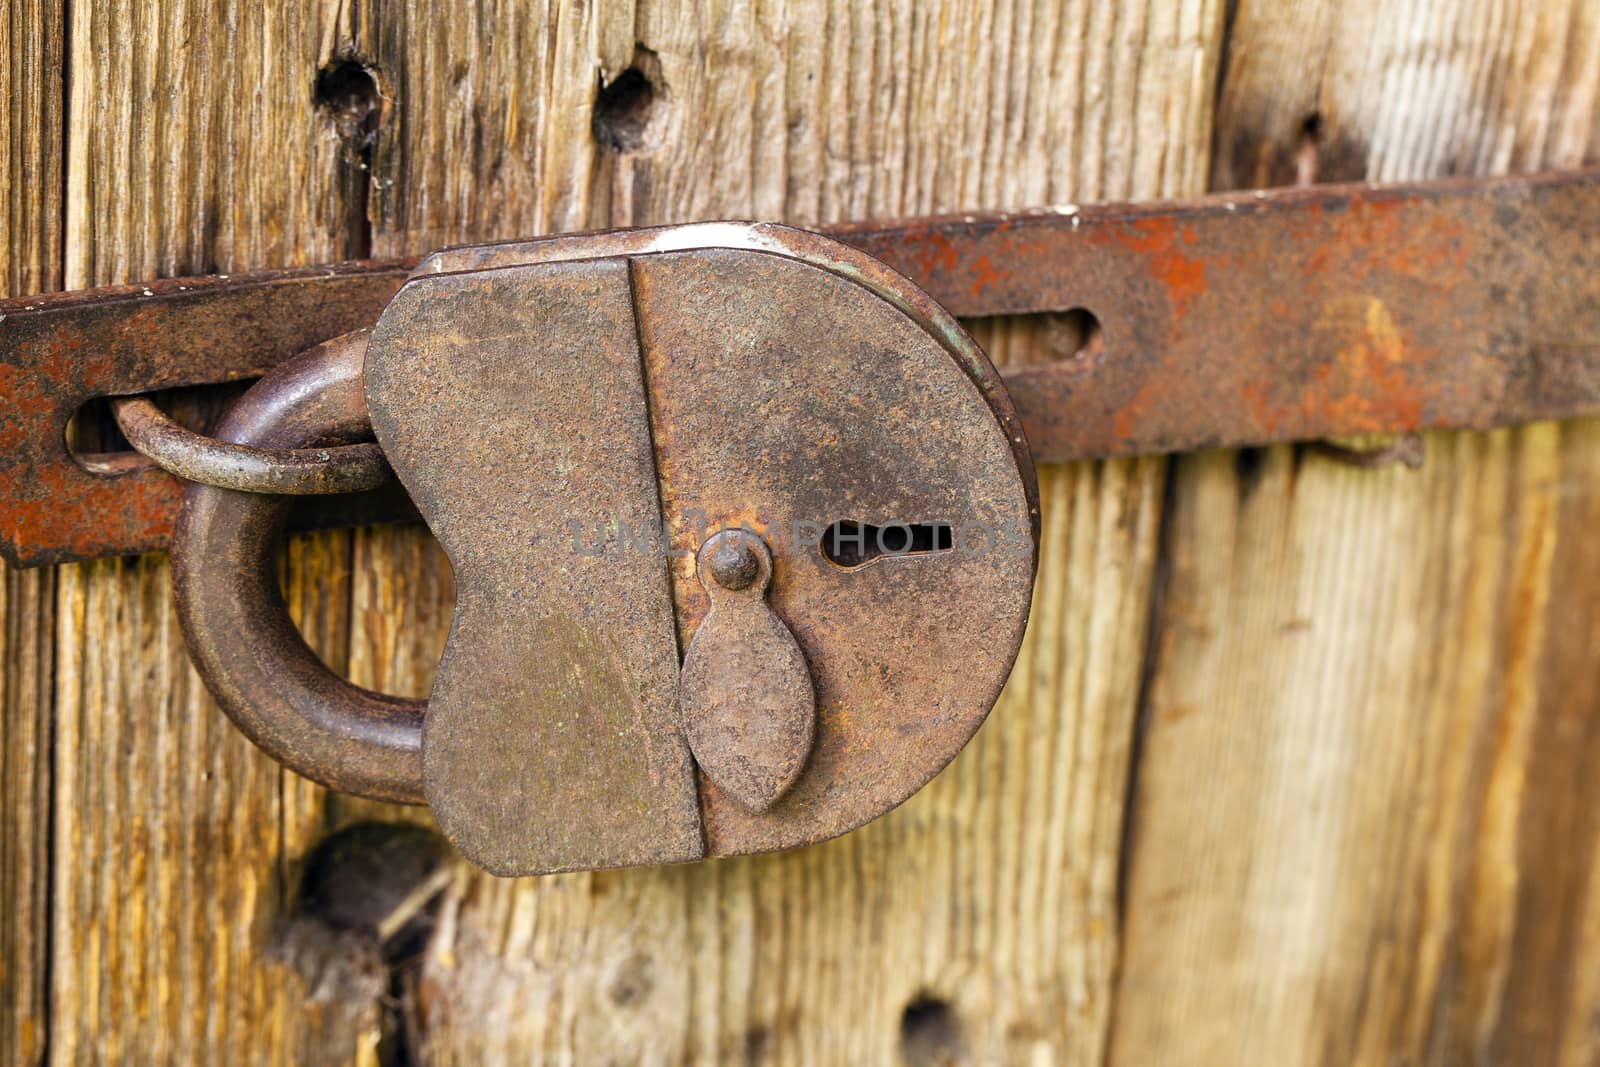   the old lock covered with a rust hanging on wooden doors